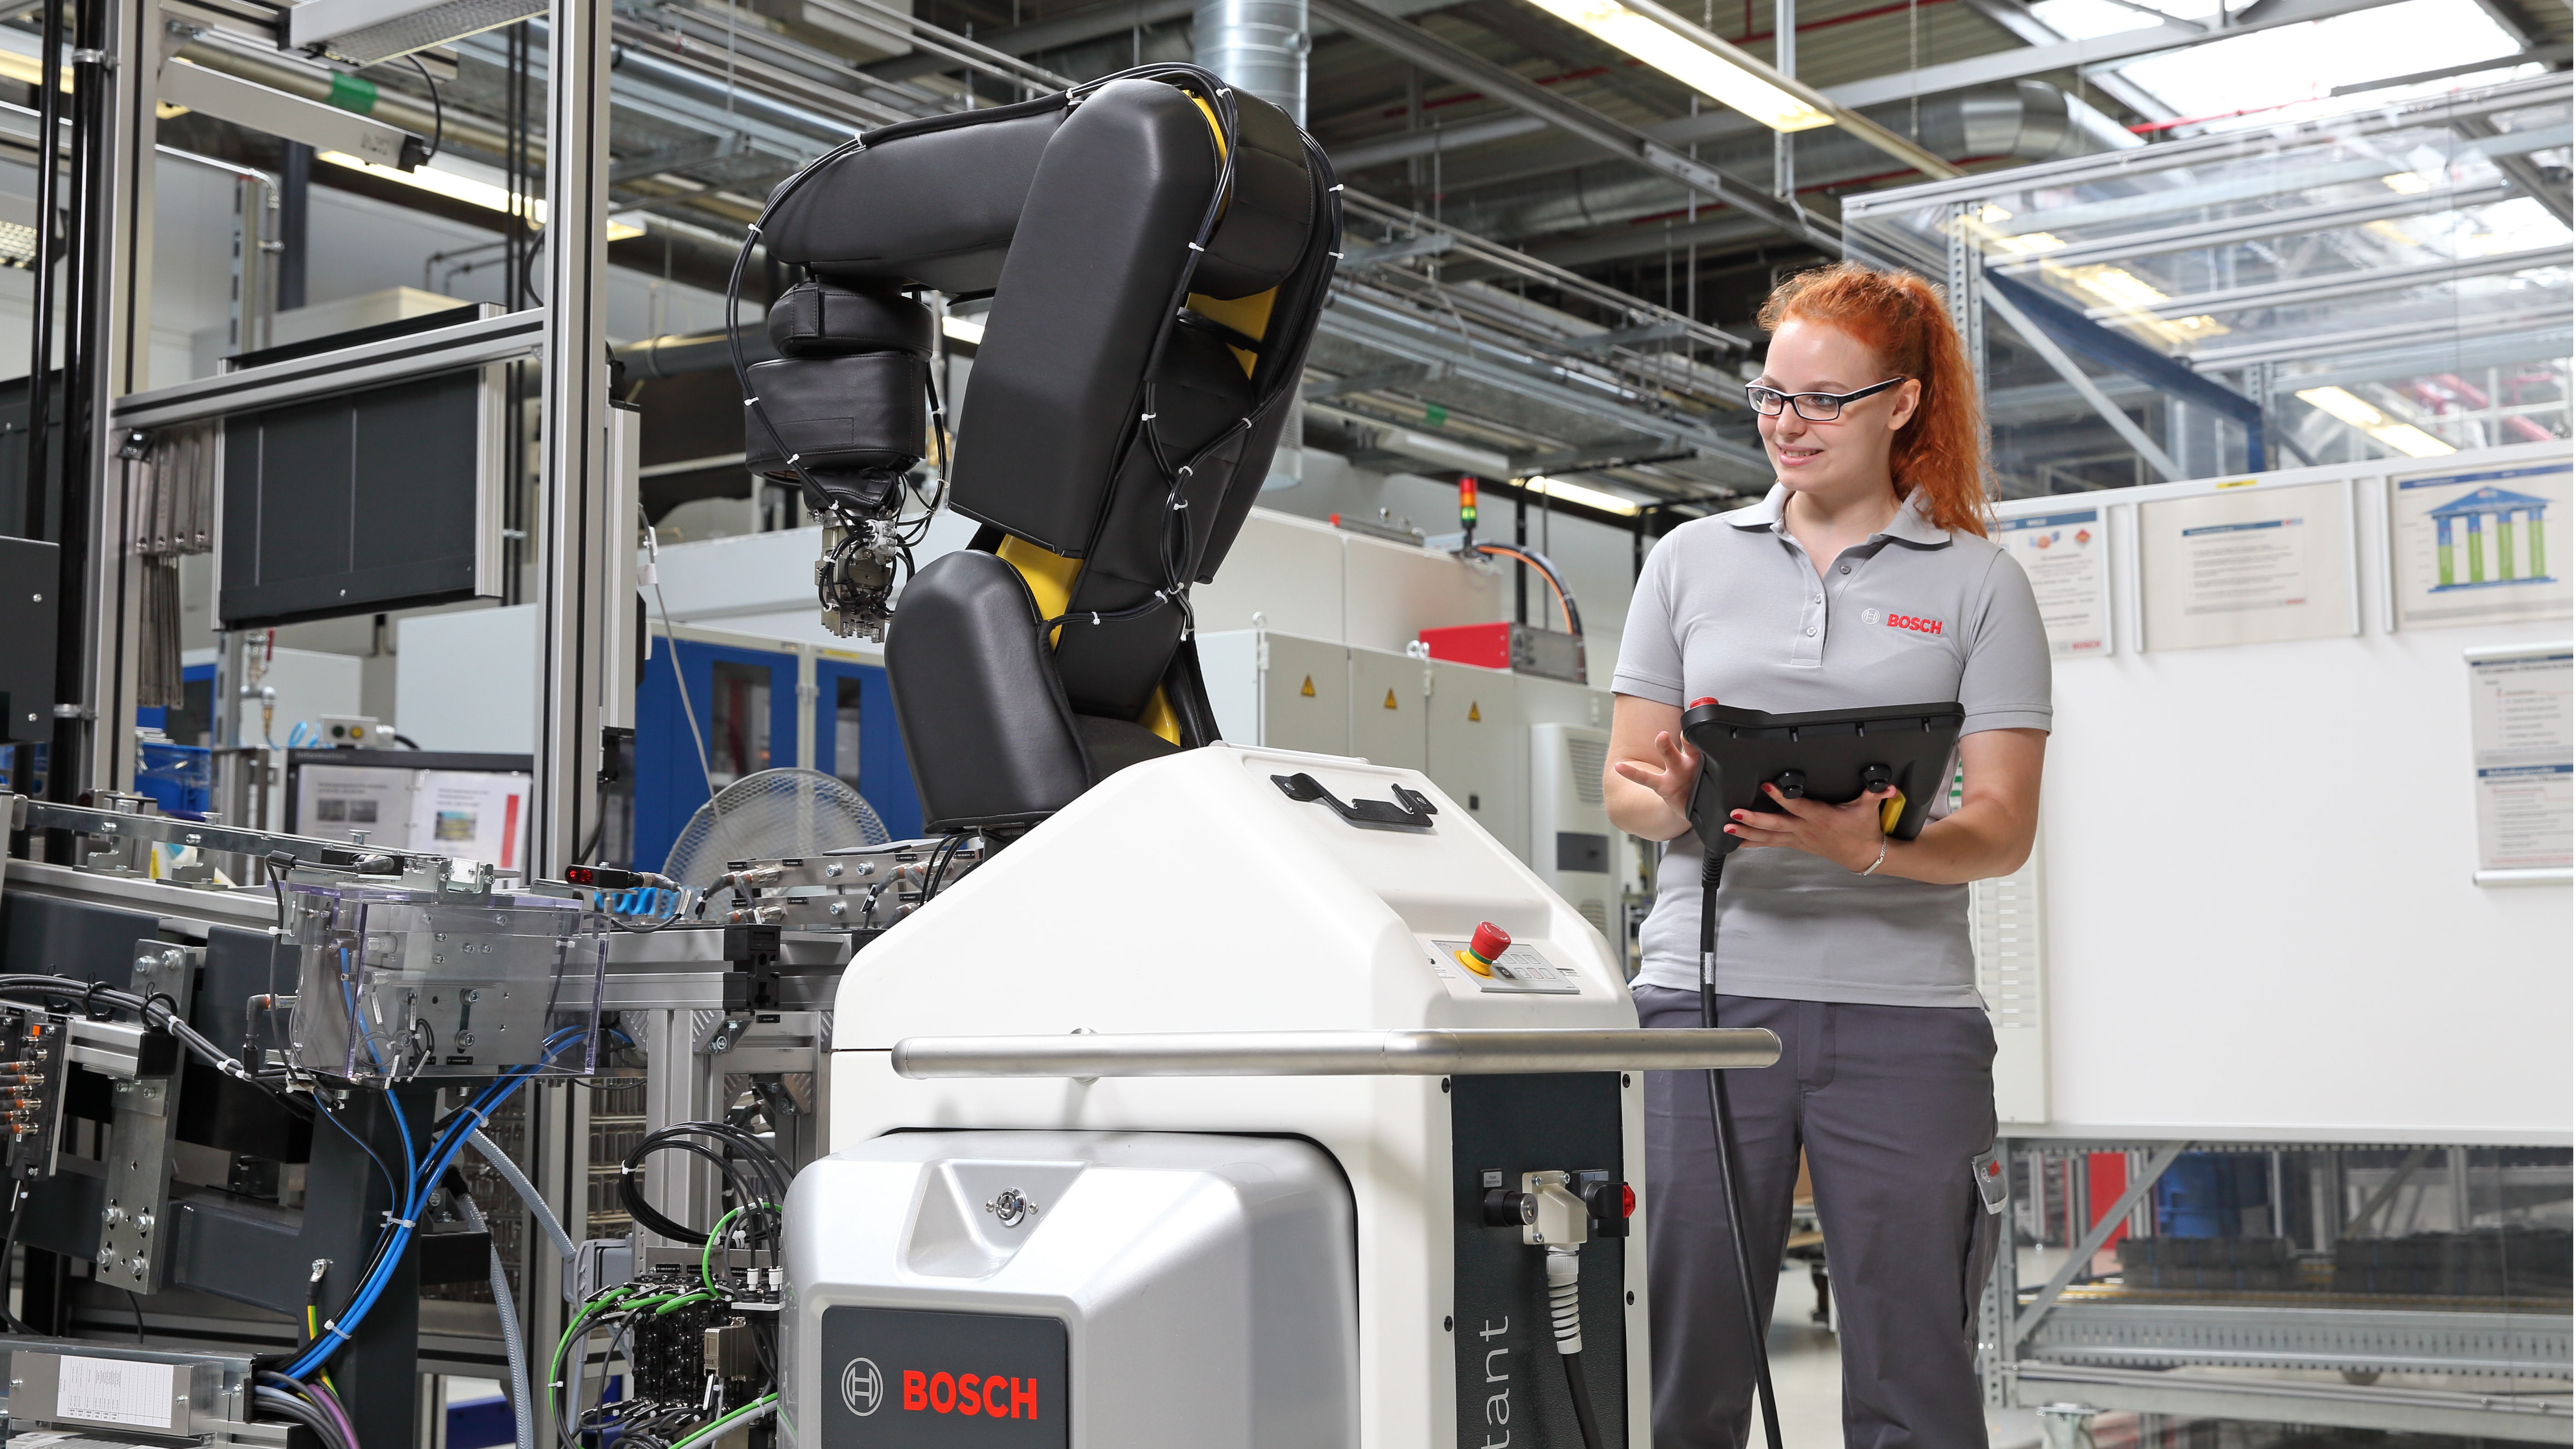 Skilled workers for Industry 4.0 